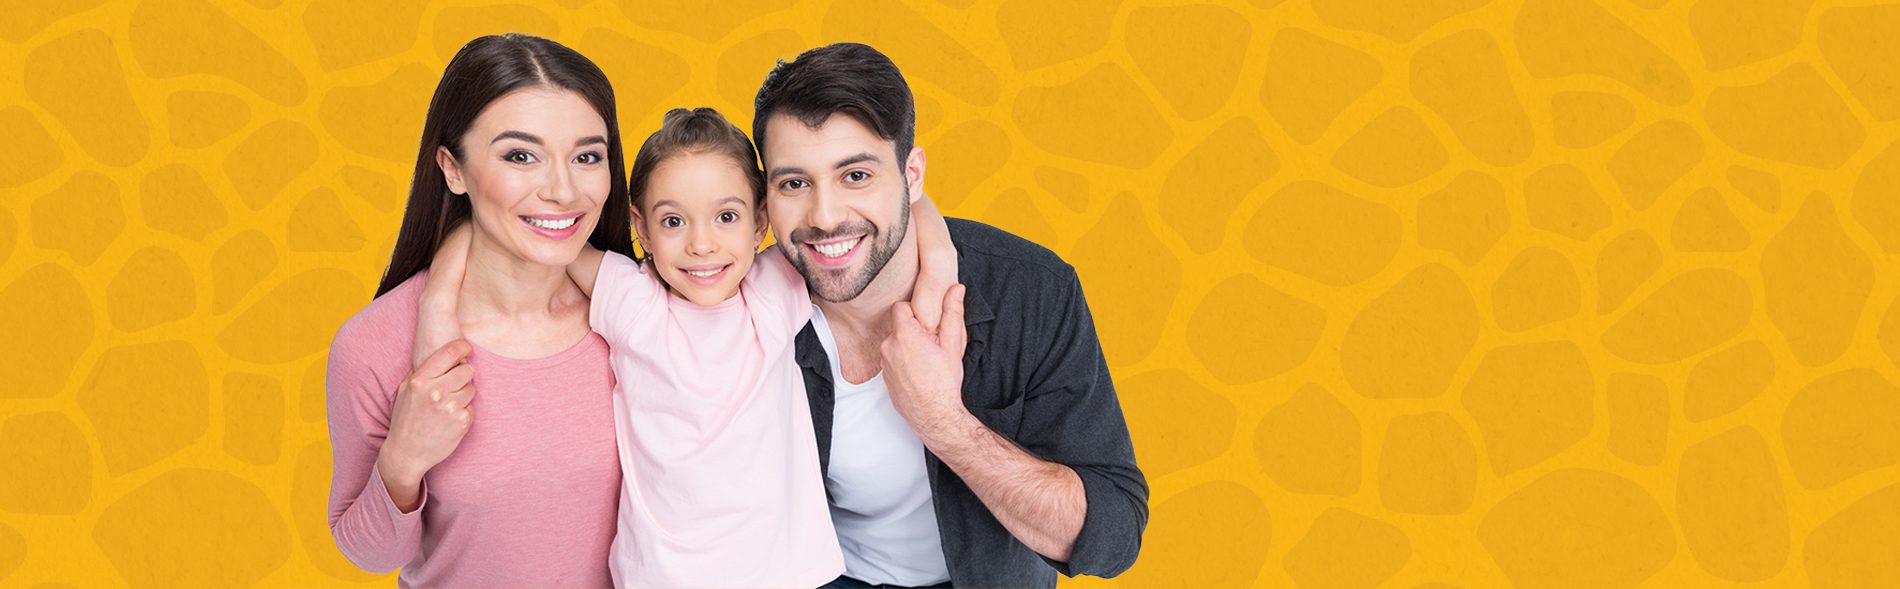 A family of three smiling at the camera in front of a yellow patterned background.